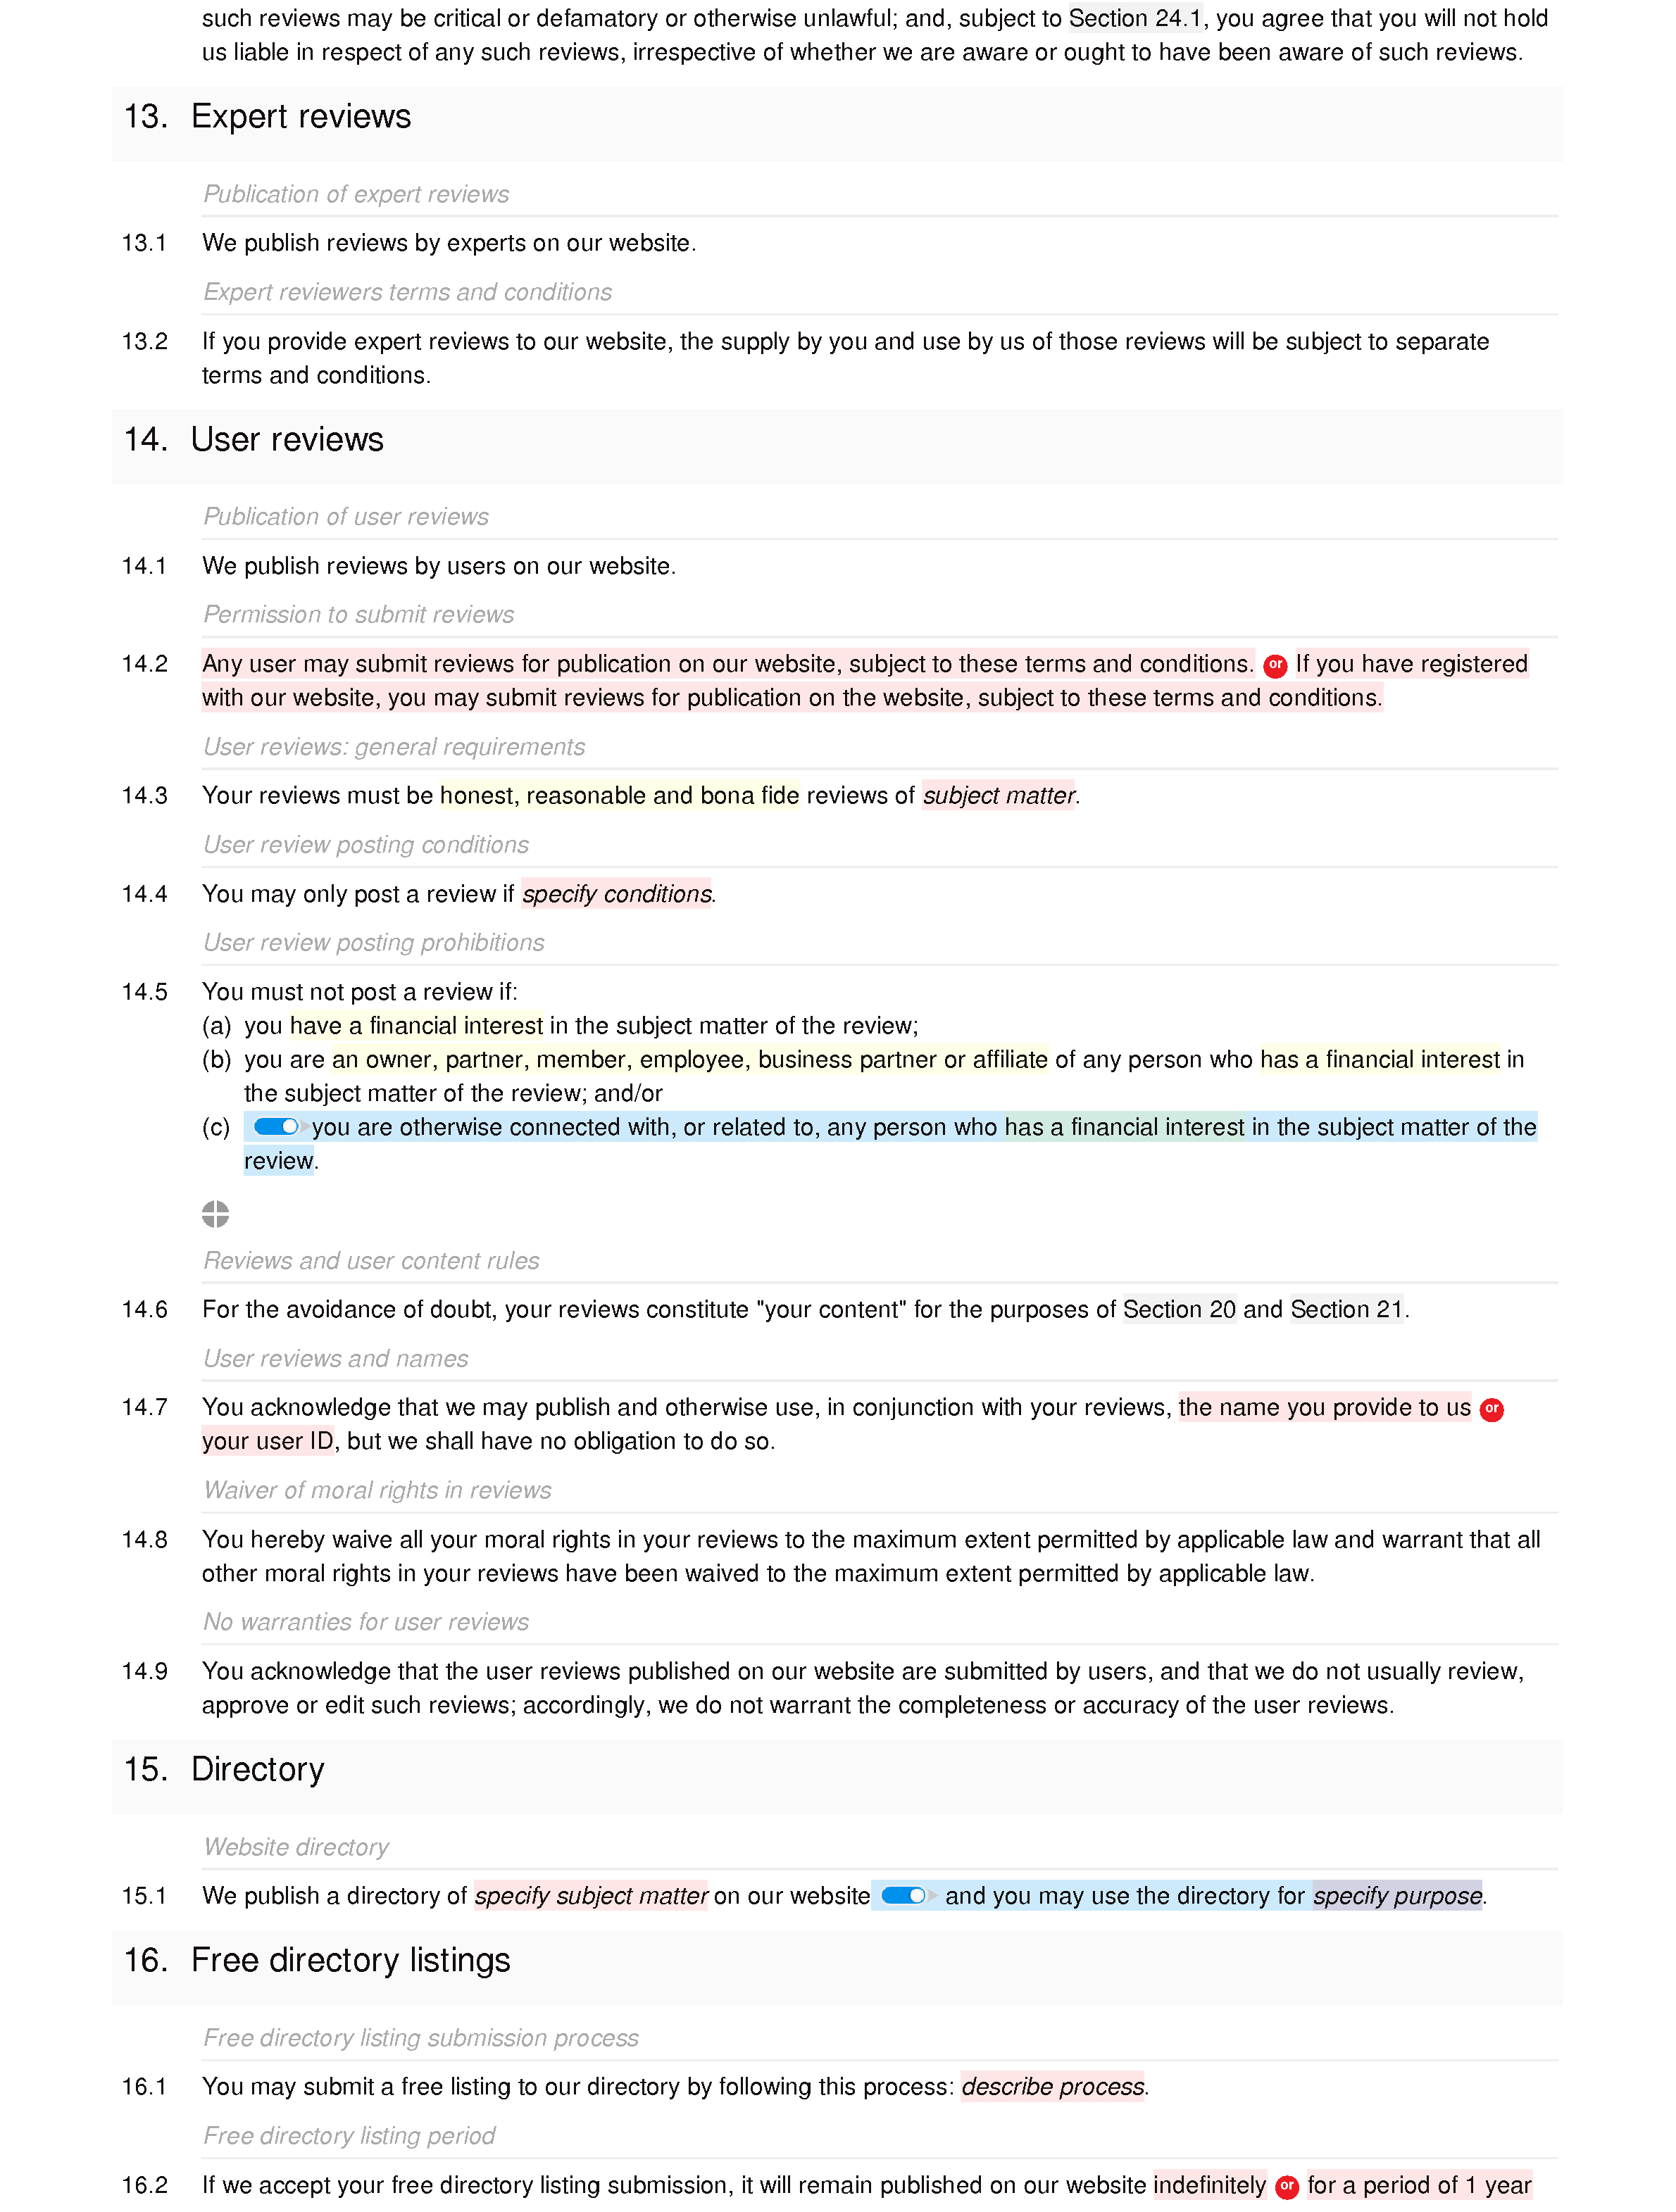 Social directory terms and conditions document editor preview